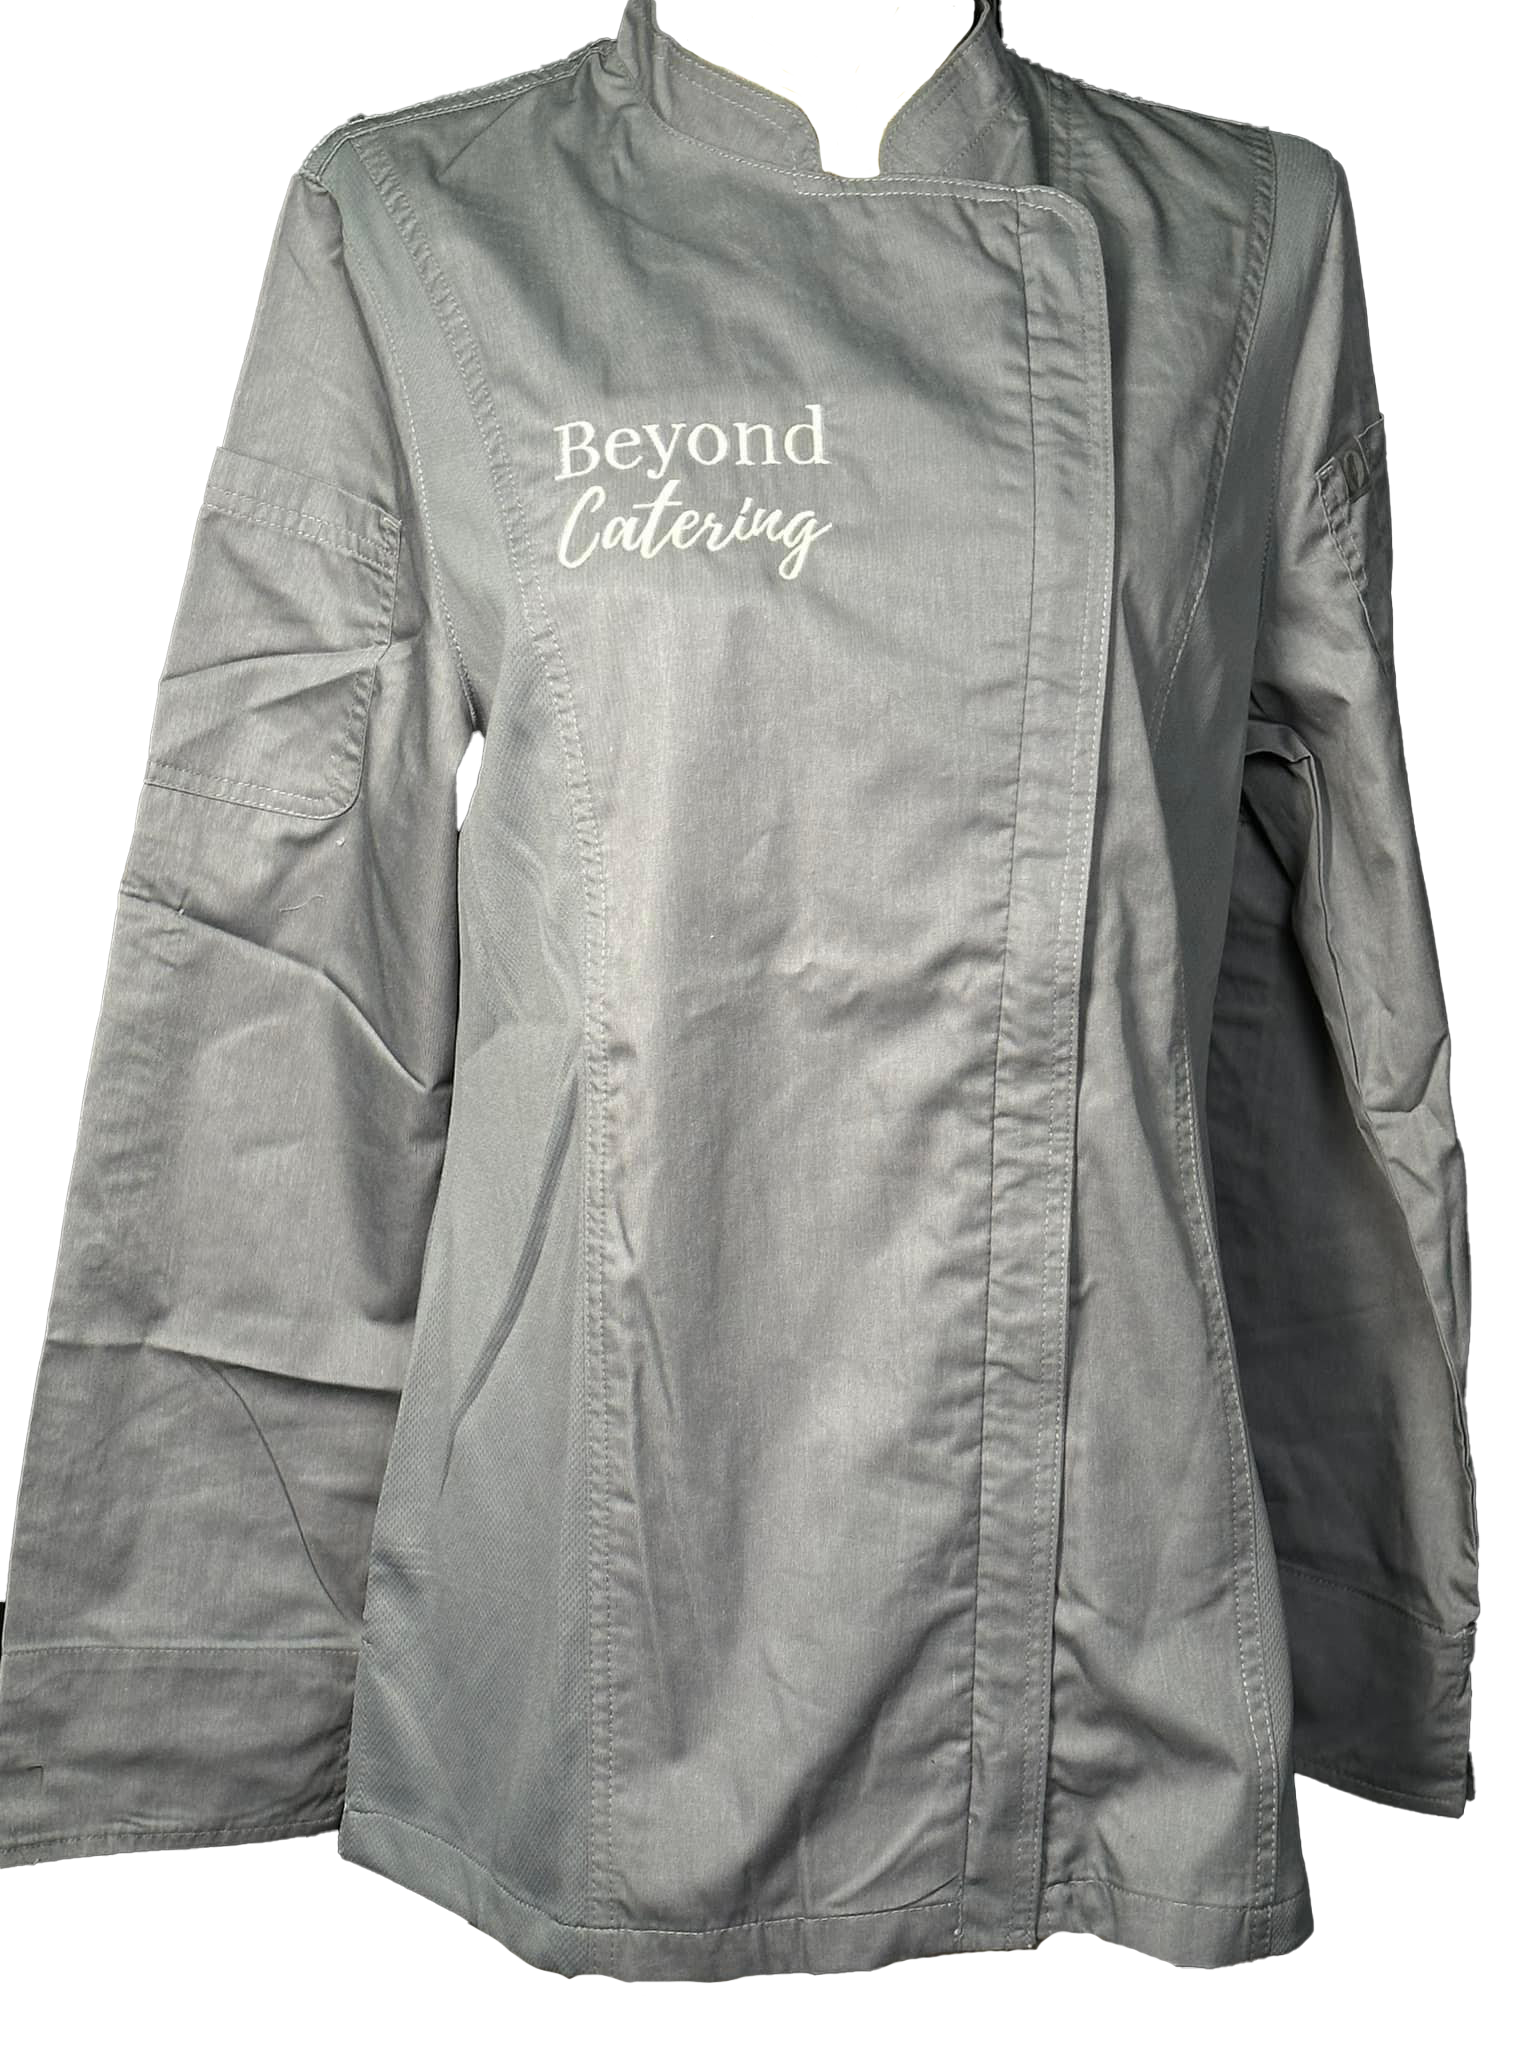 beyond catering embroidery